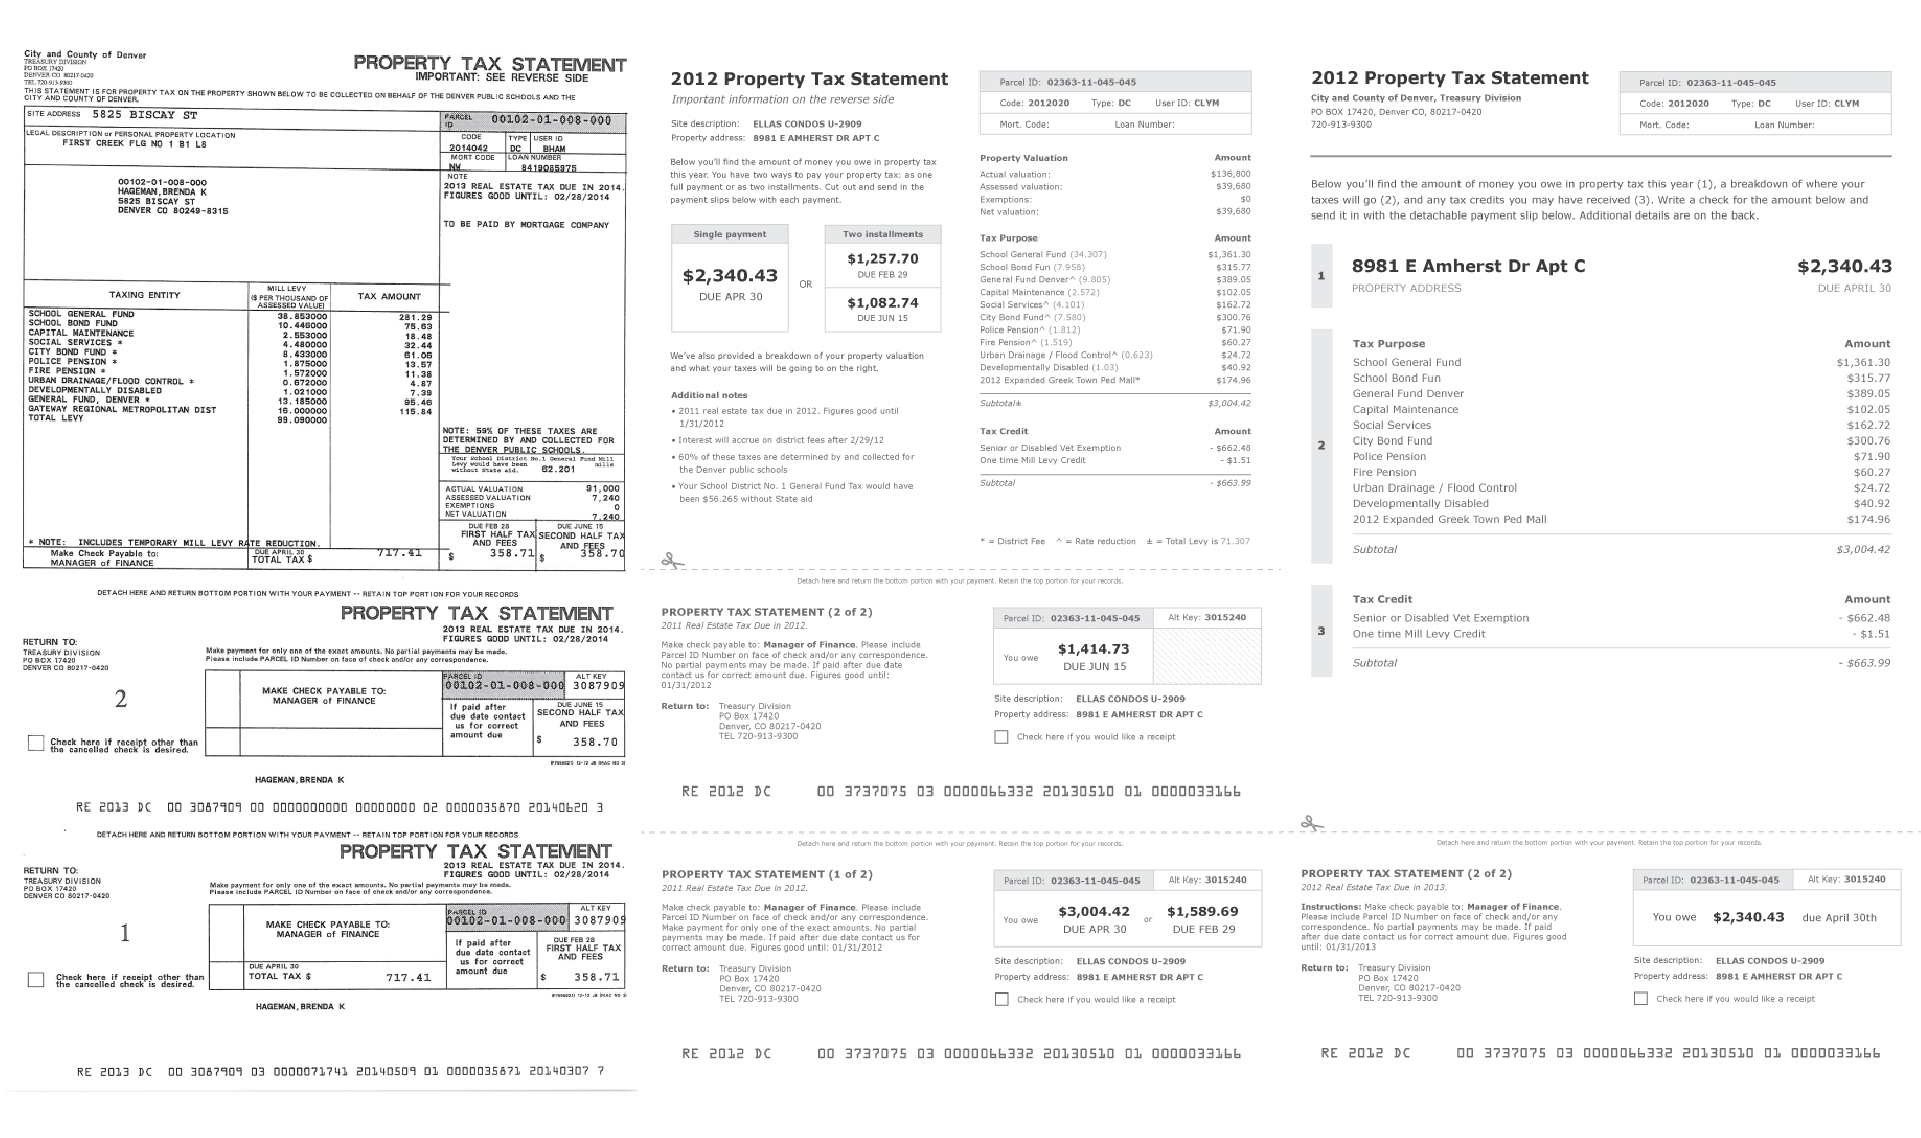 Comparison of Property Tax Statements